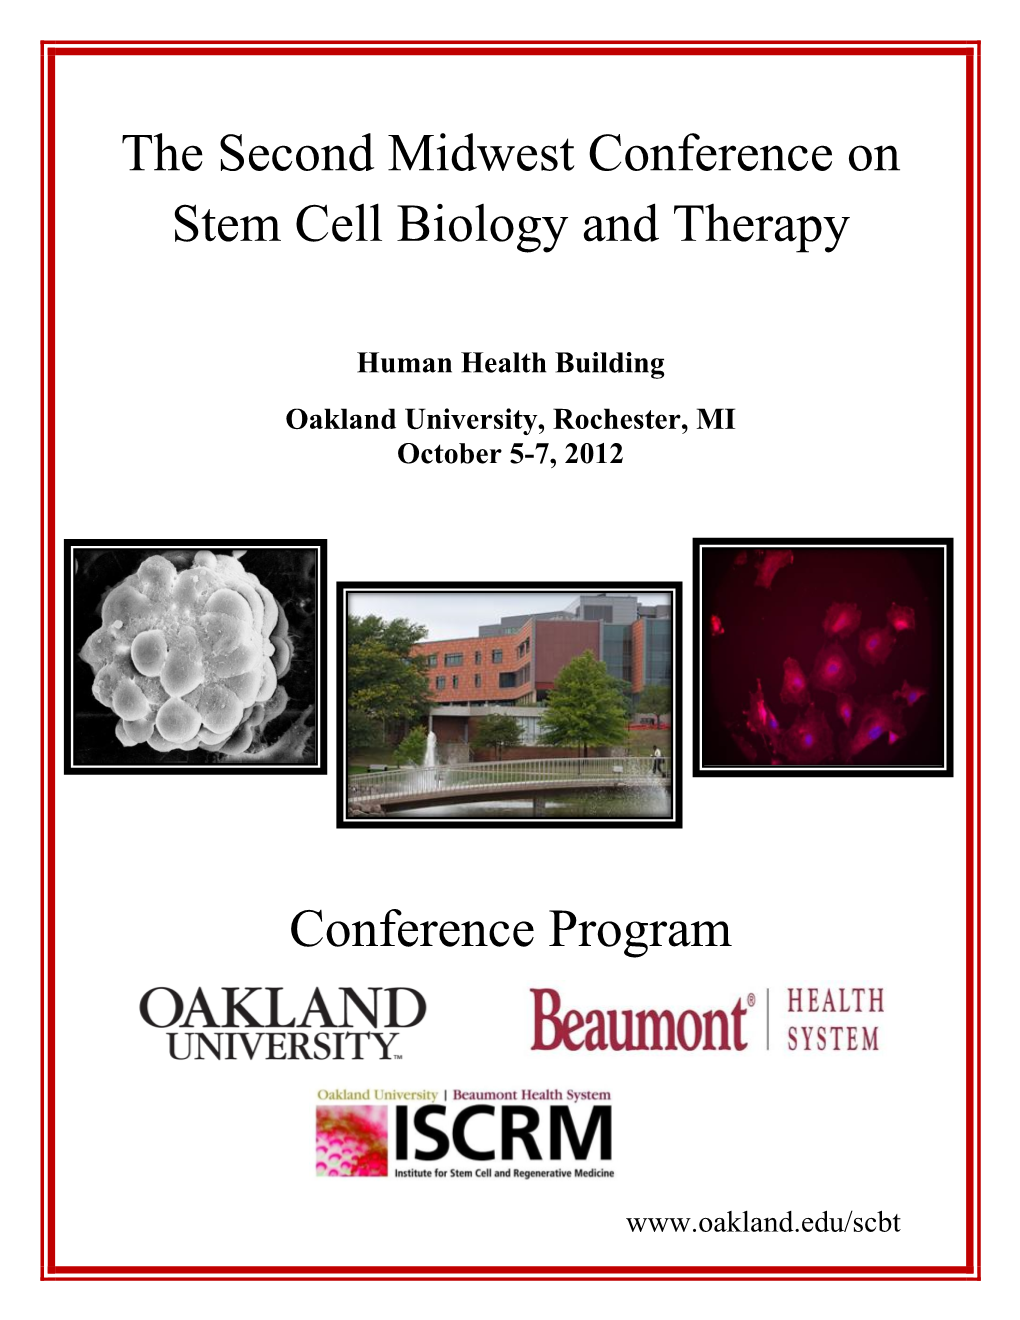 The Second Midwest Conference on Stem Cell Biology and Therapy Conference Program